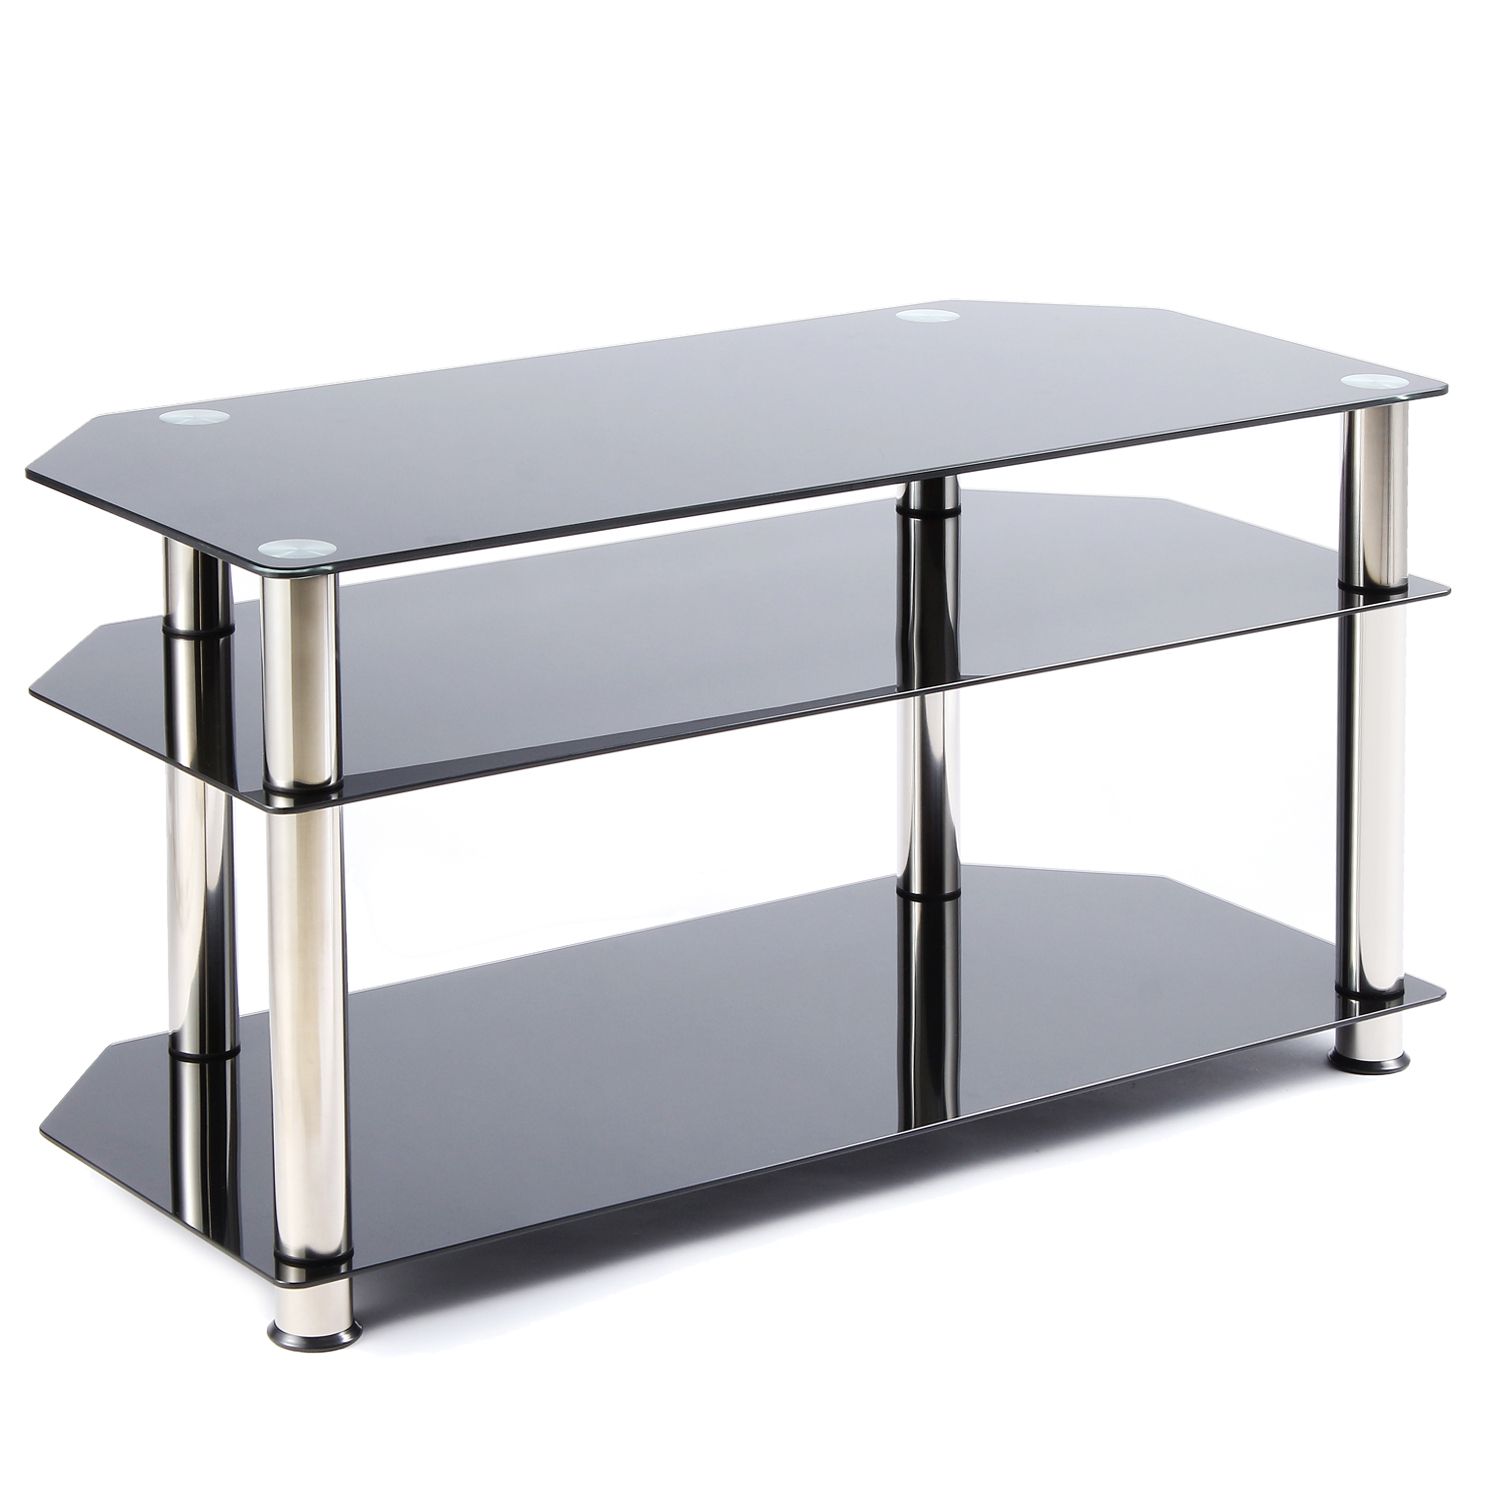 Rfiver Glass Corner Tv Stand For 26 27 28 30 32 37 40 42 Pertaining To Corner Tv Stands For 50 Inch Tv (View 11 of 15)